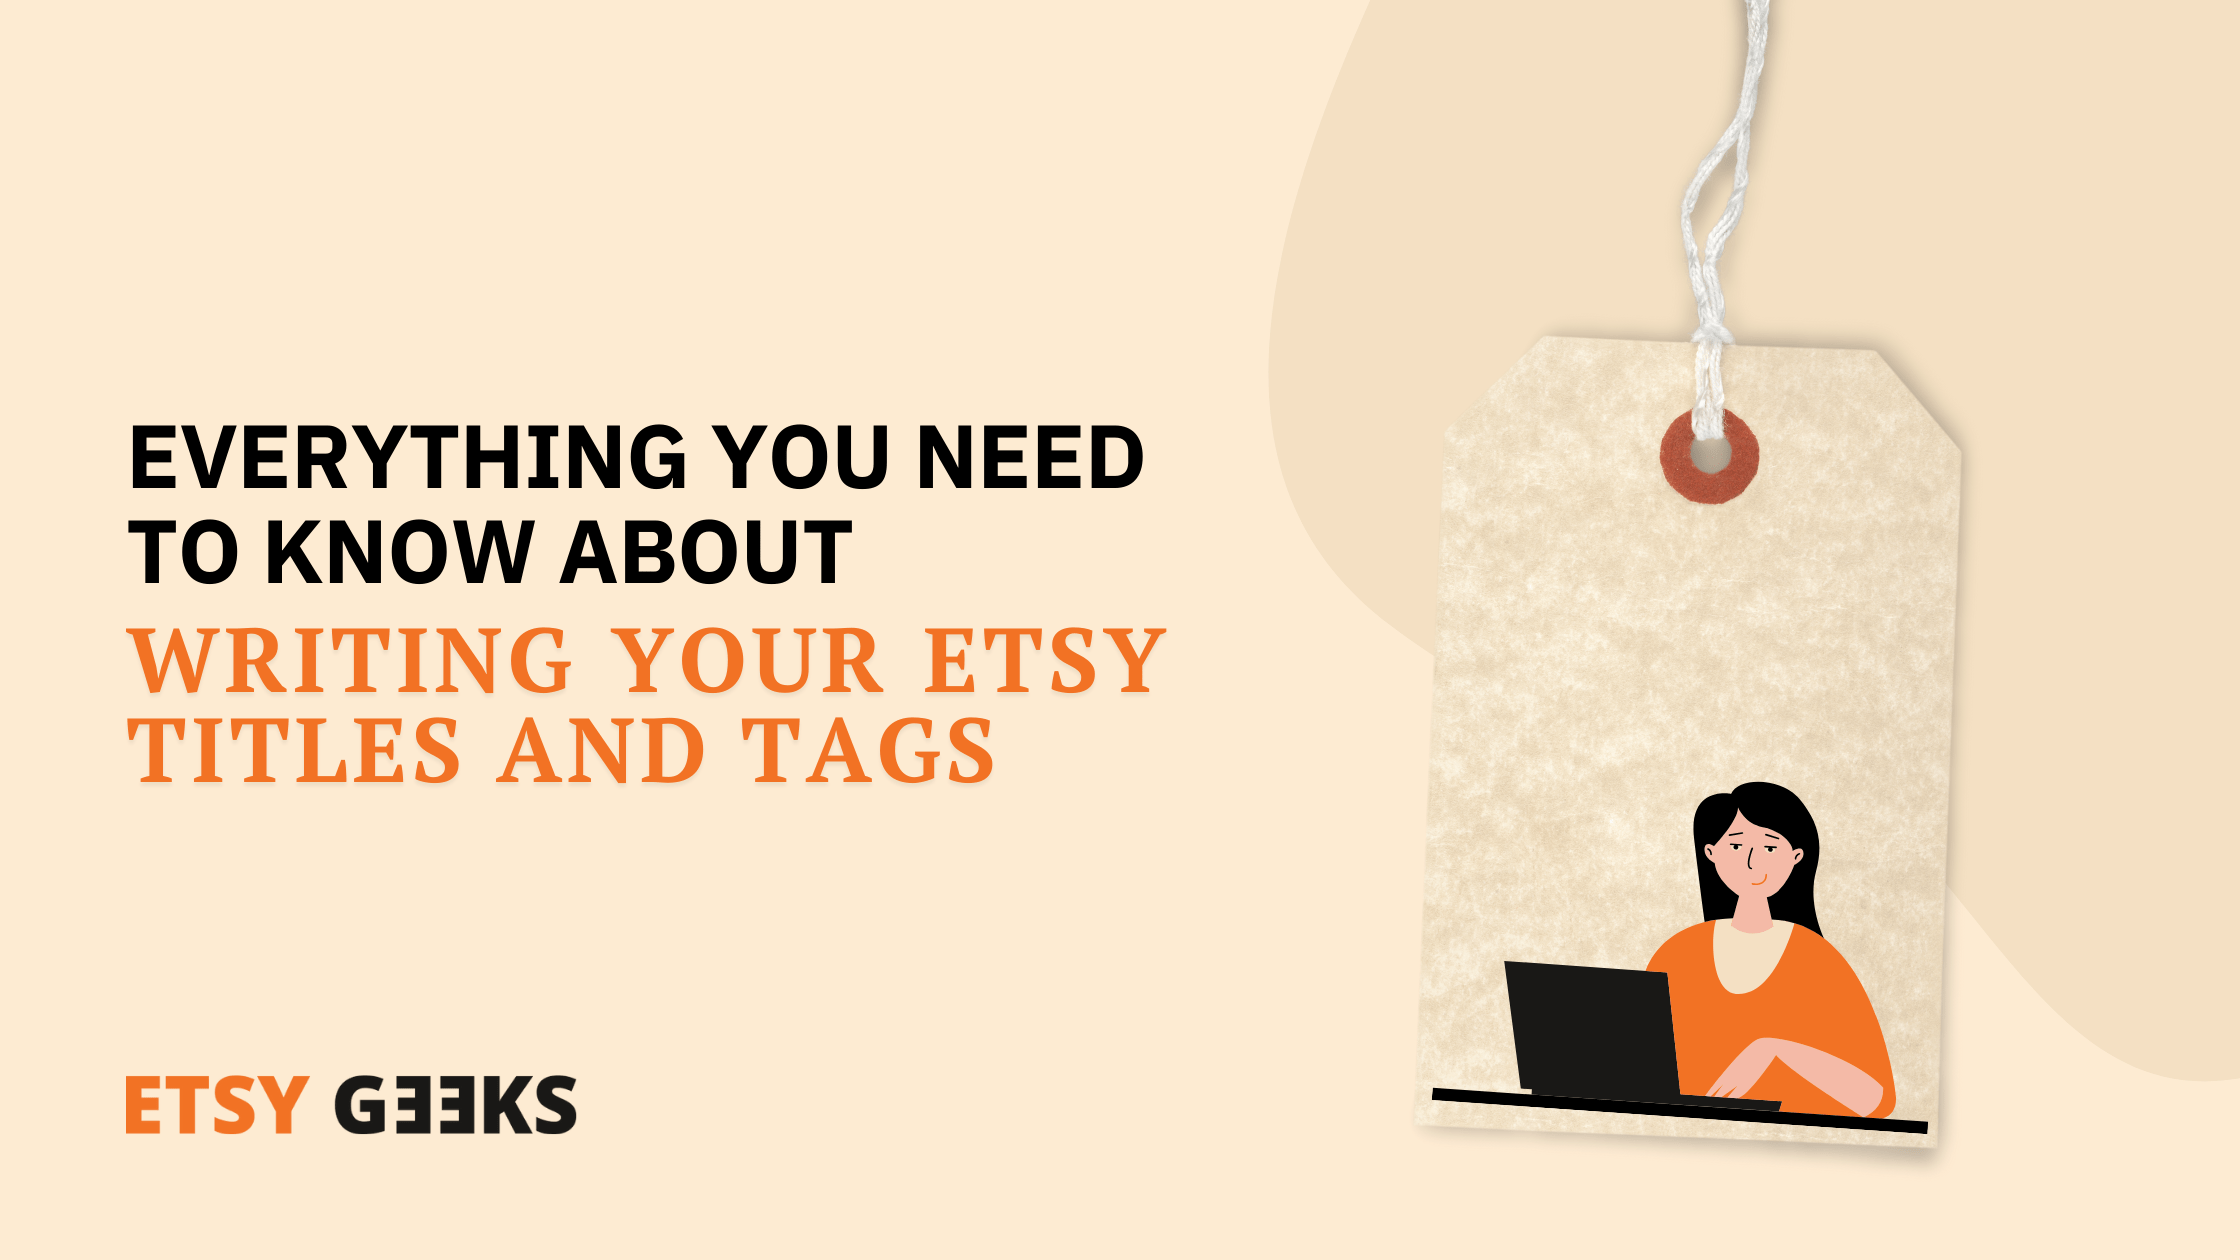 Everything You Need to Know About Writing Your Etsy Titles and Tags